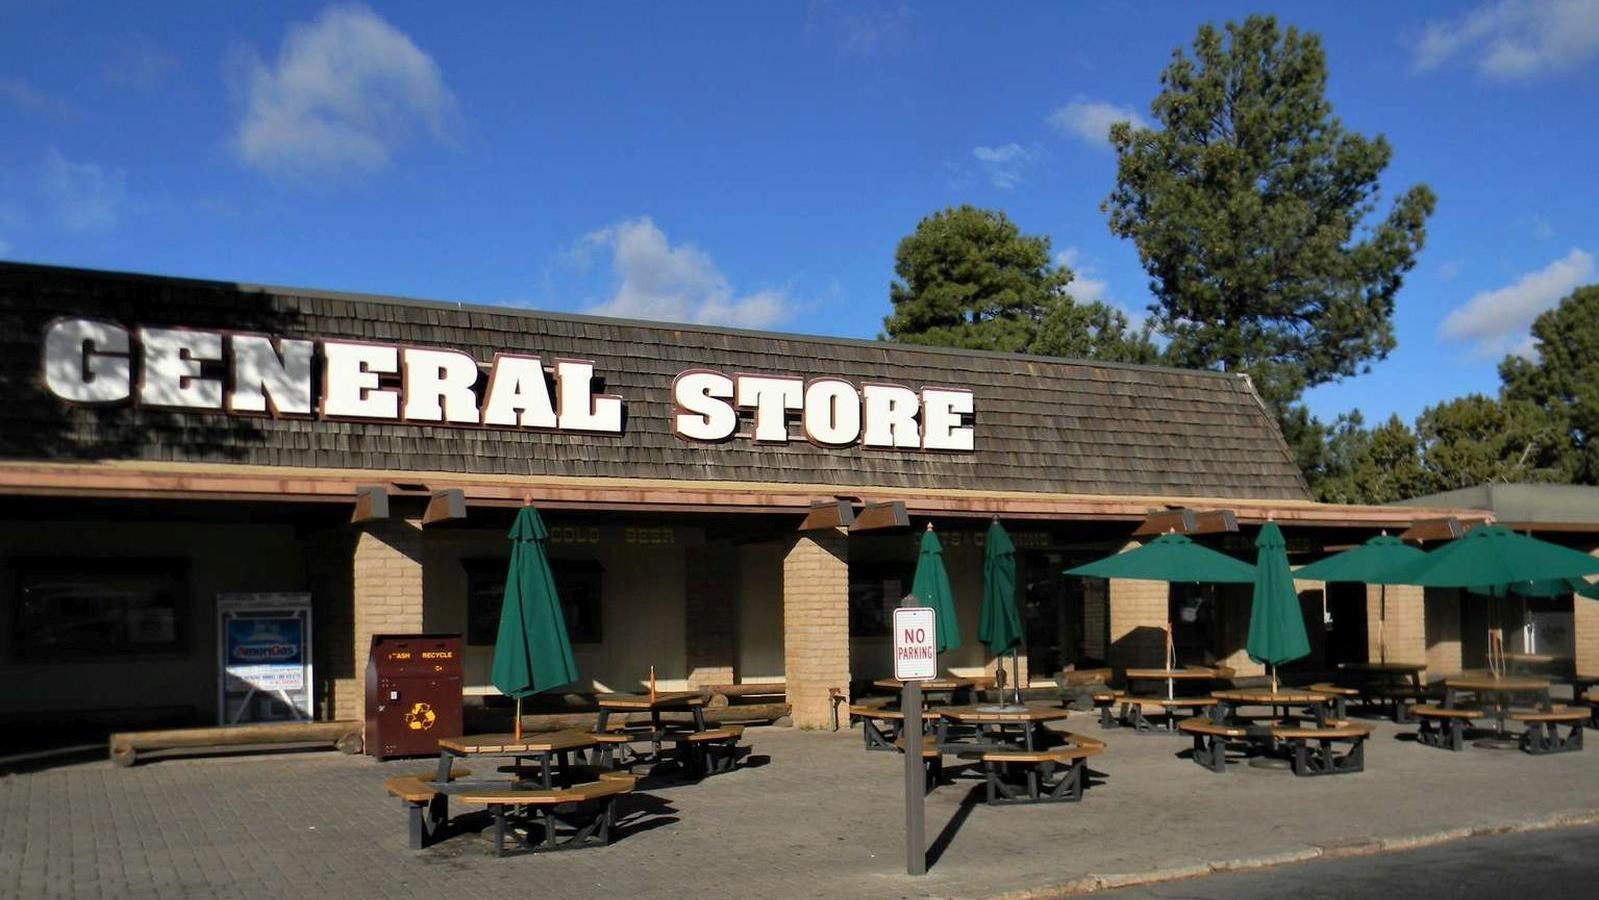 Large white letters reading General Store dominates the roof of a single story brown building